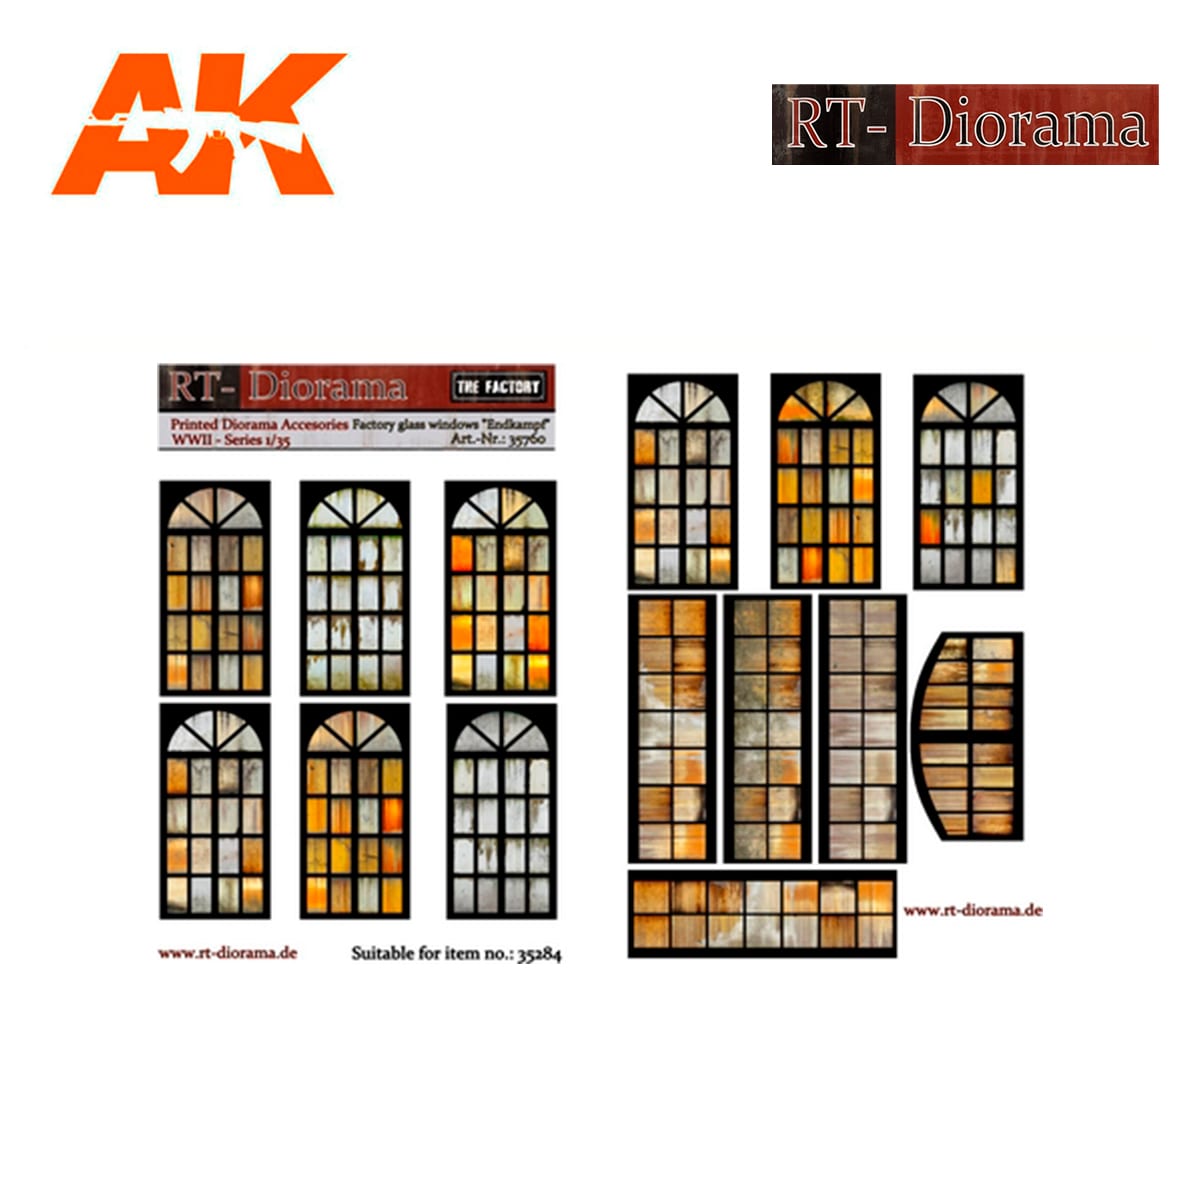 Printed Accesories: Factory glass windows «Endkampf»